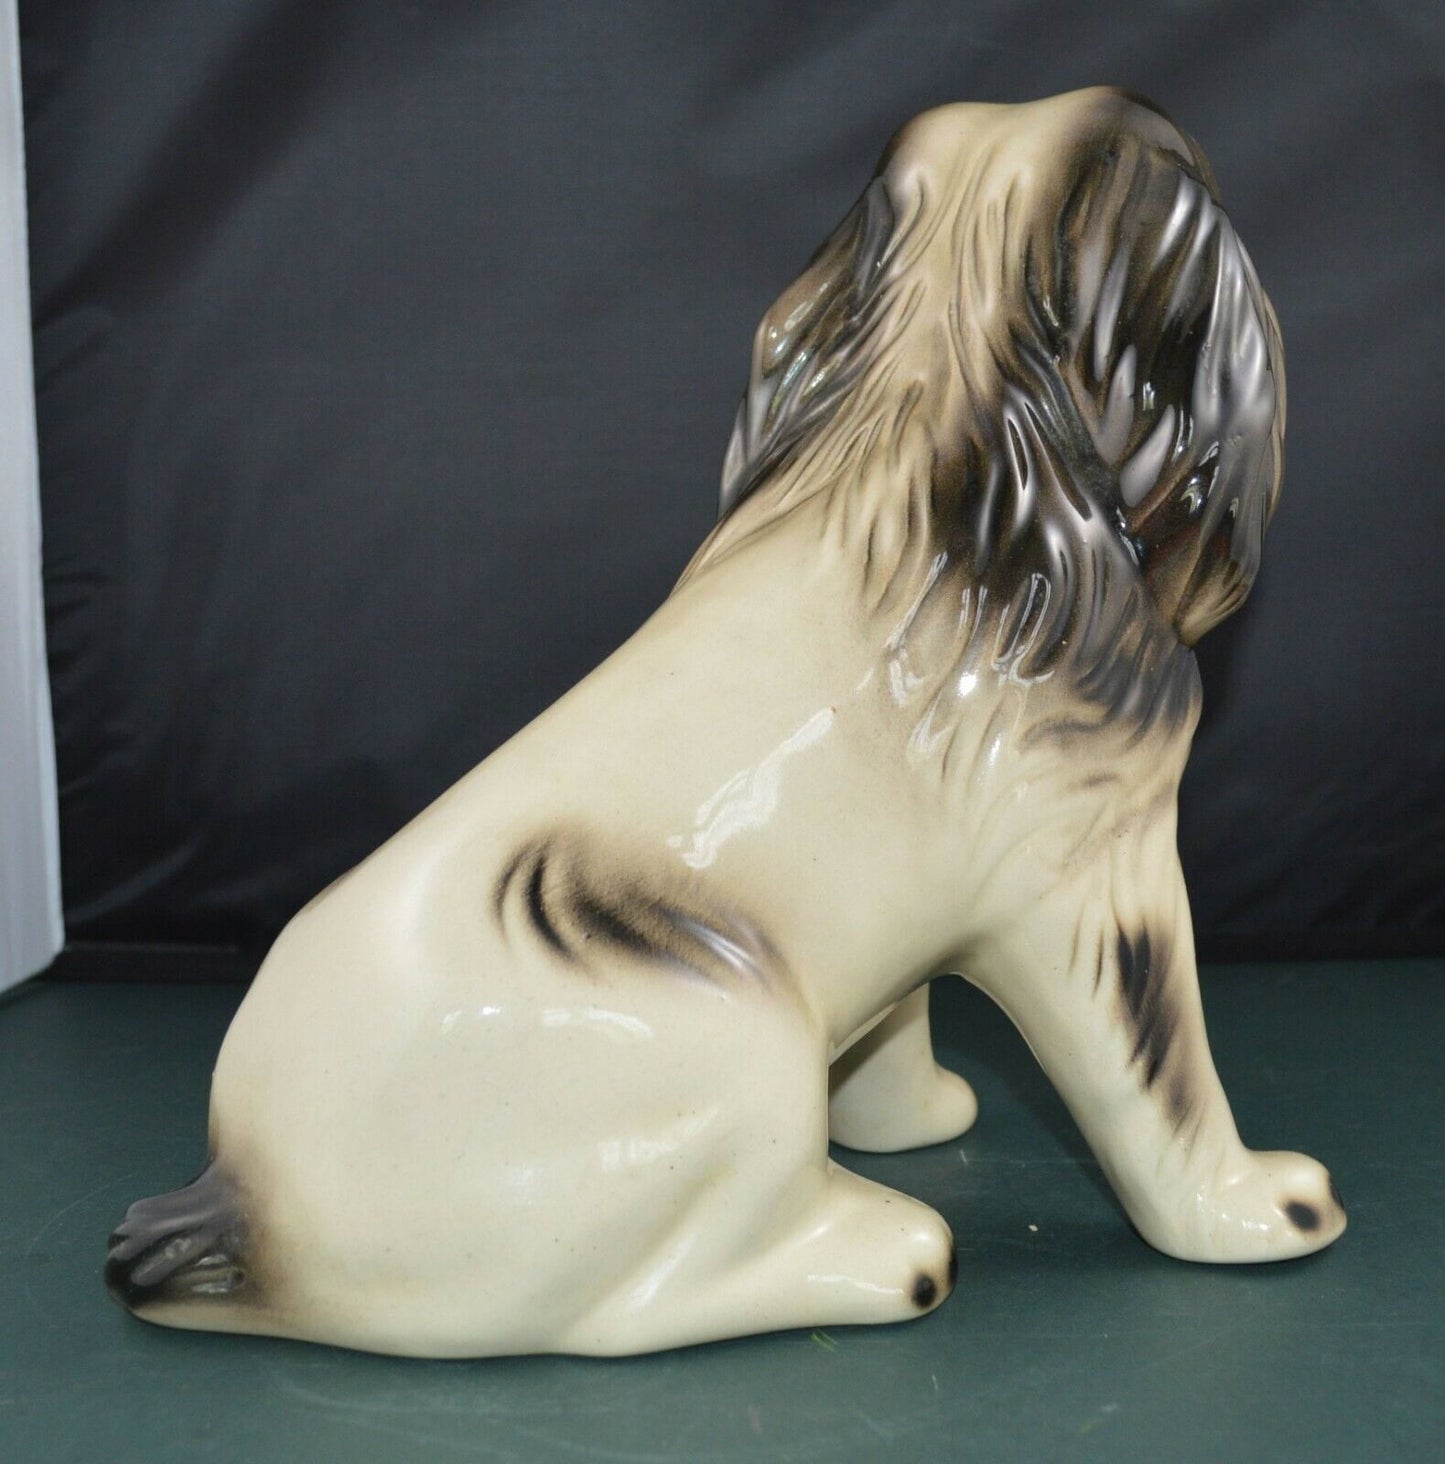 DECORATIVE DOG ORNAMENT SAD LOOKING SPANIEL FIGURINE(PREVIOUSLY OWNED) GOOD CONDITION - TMD167207